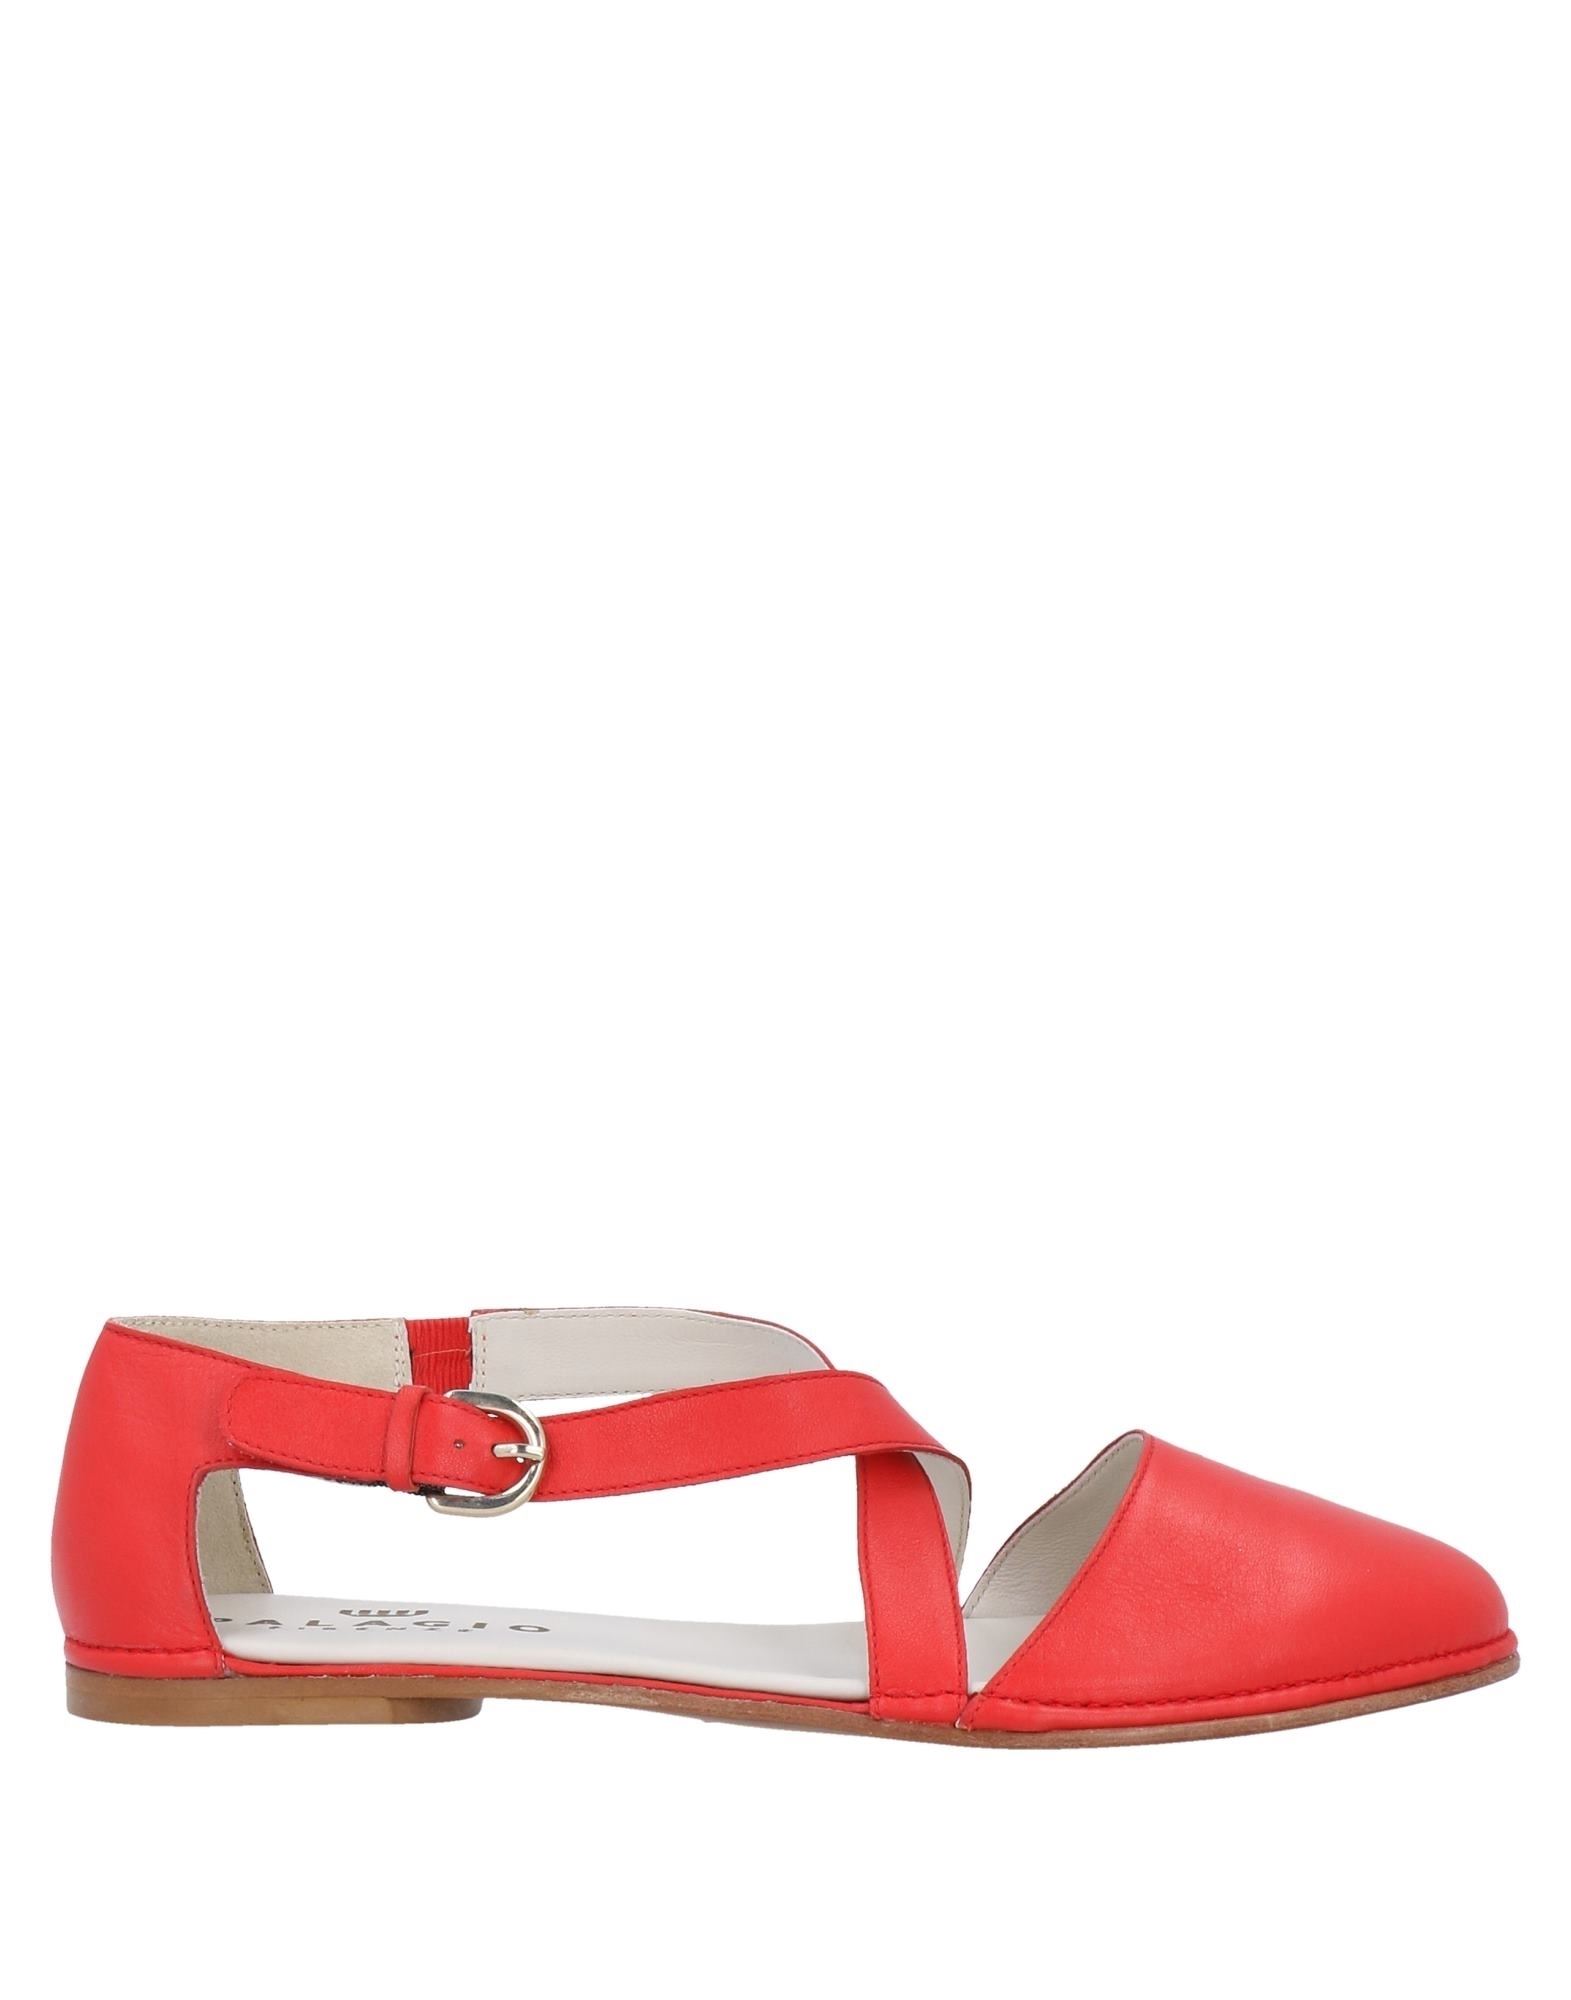 Palagio Firenze Ballet Flats In Red